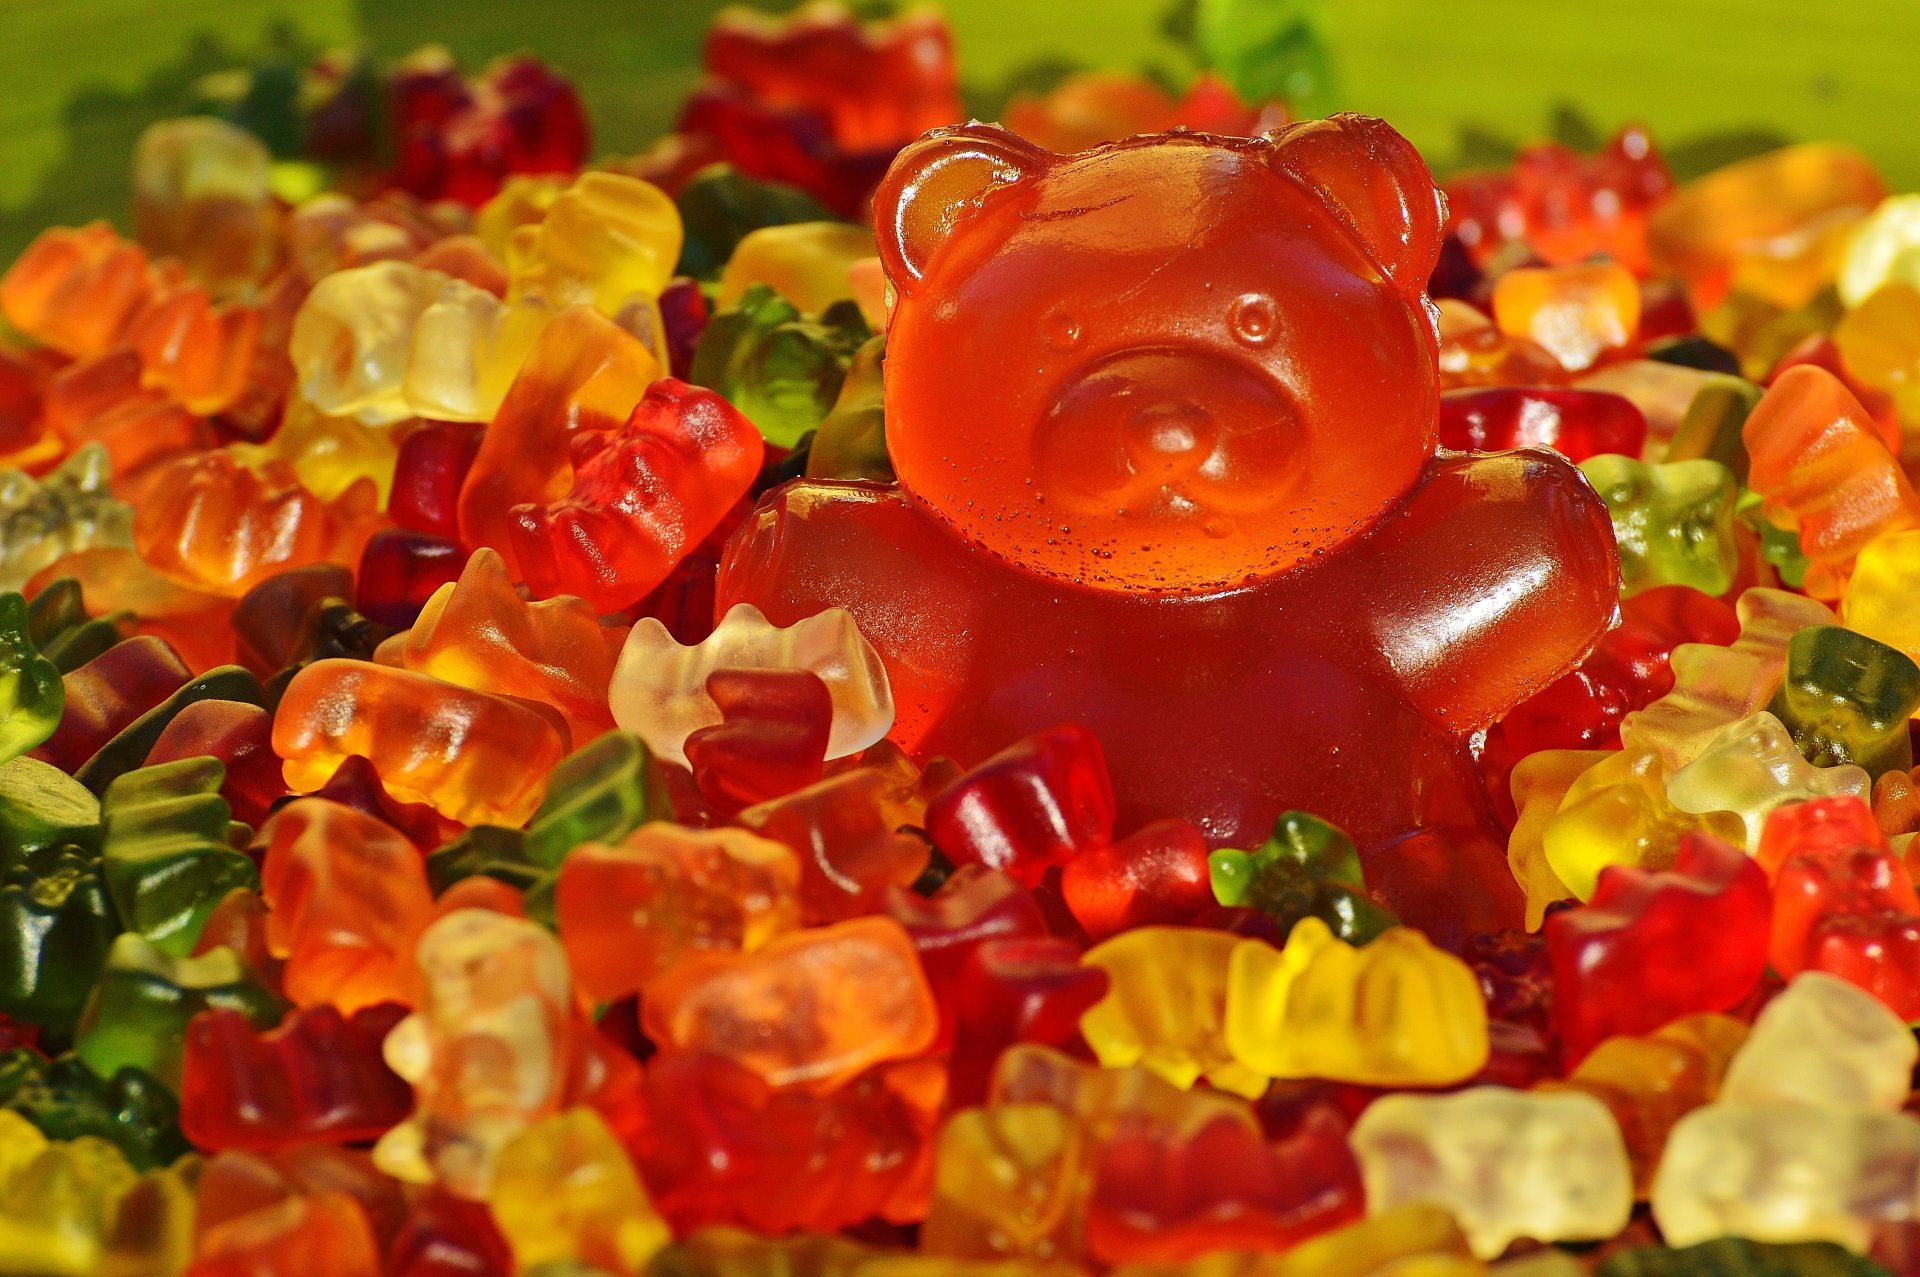 Gummy Bears Photos Download The BEST Free Gummy Bears Stock Photos  HD  Images